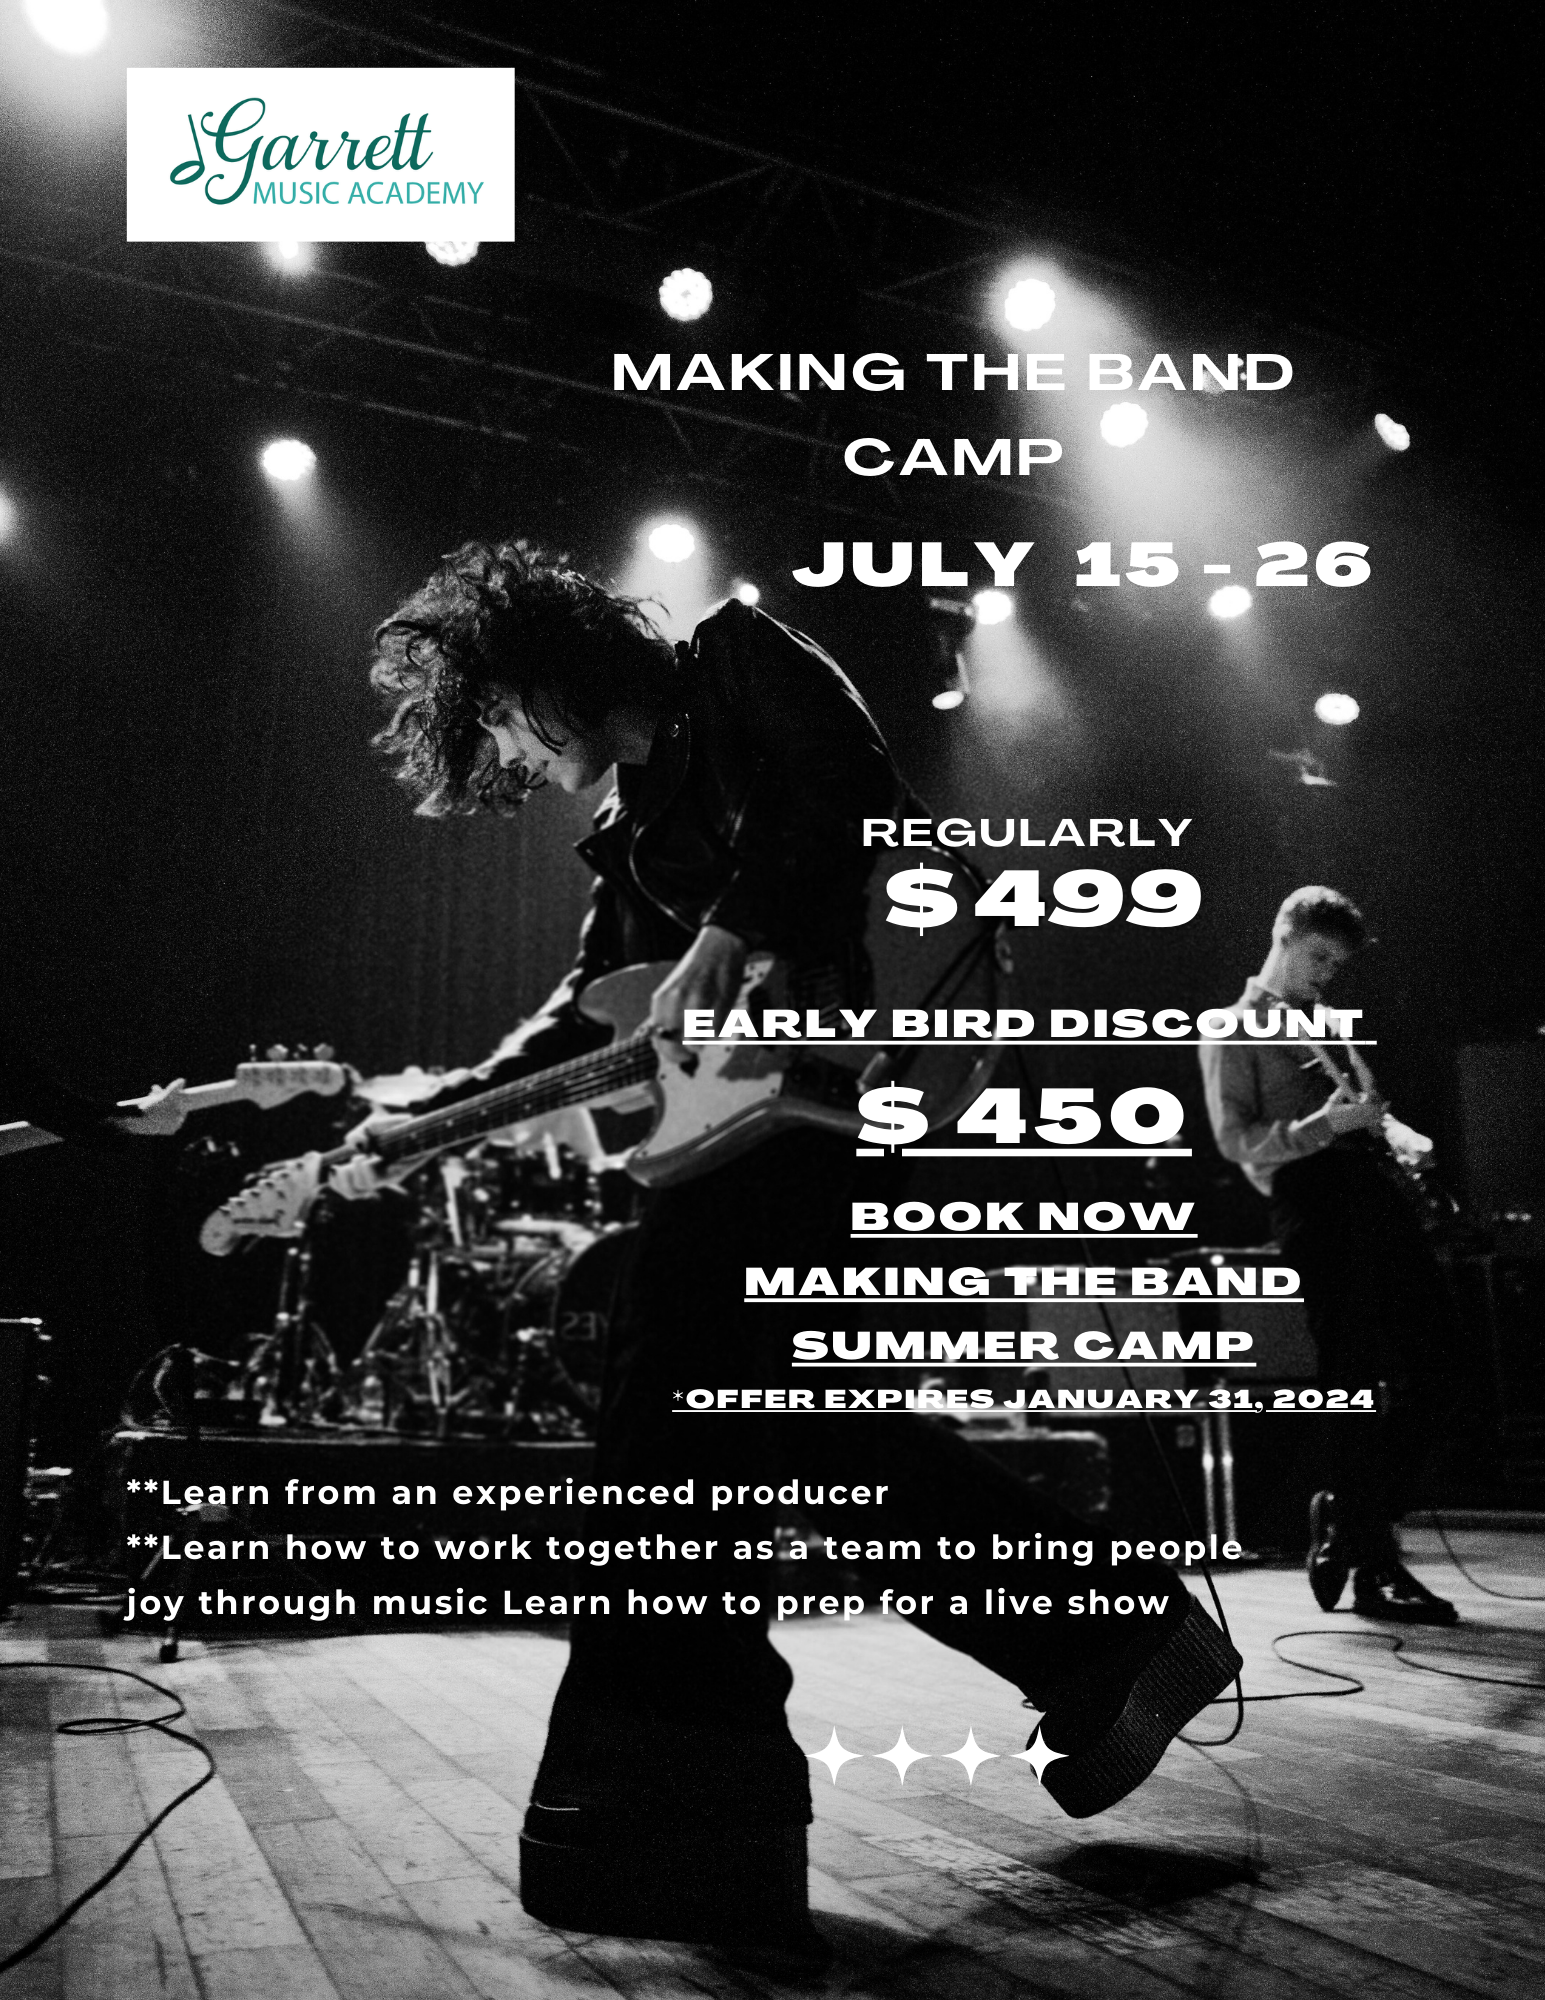 Making the Band Summer Camp